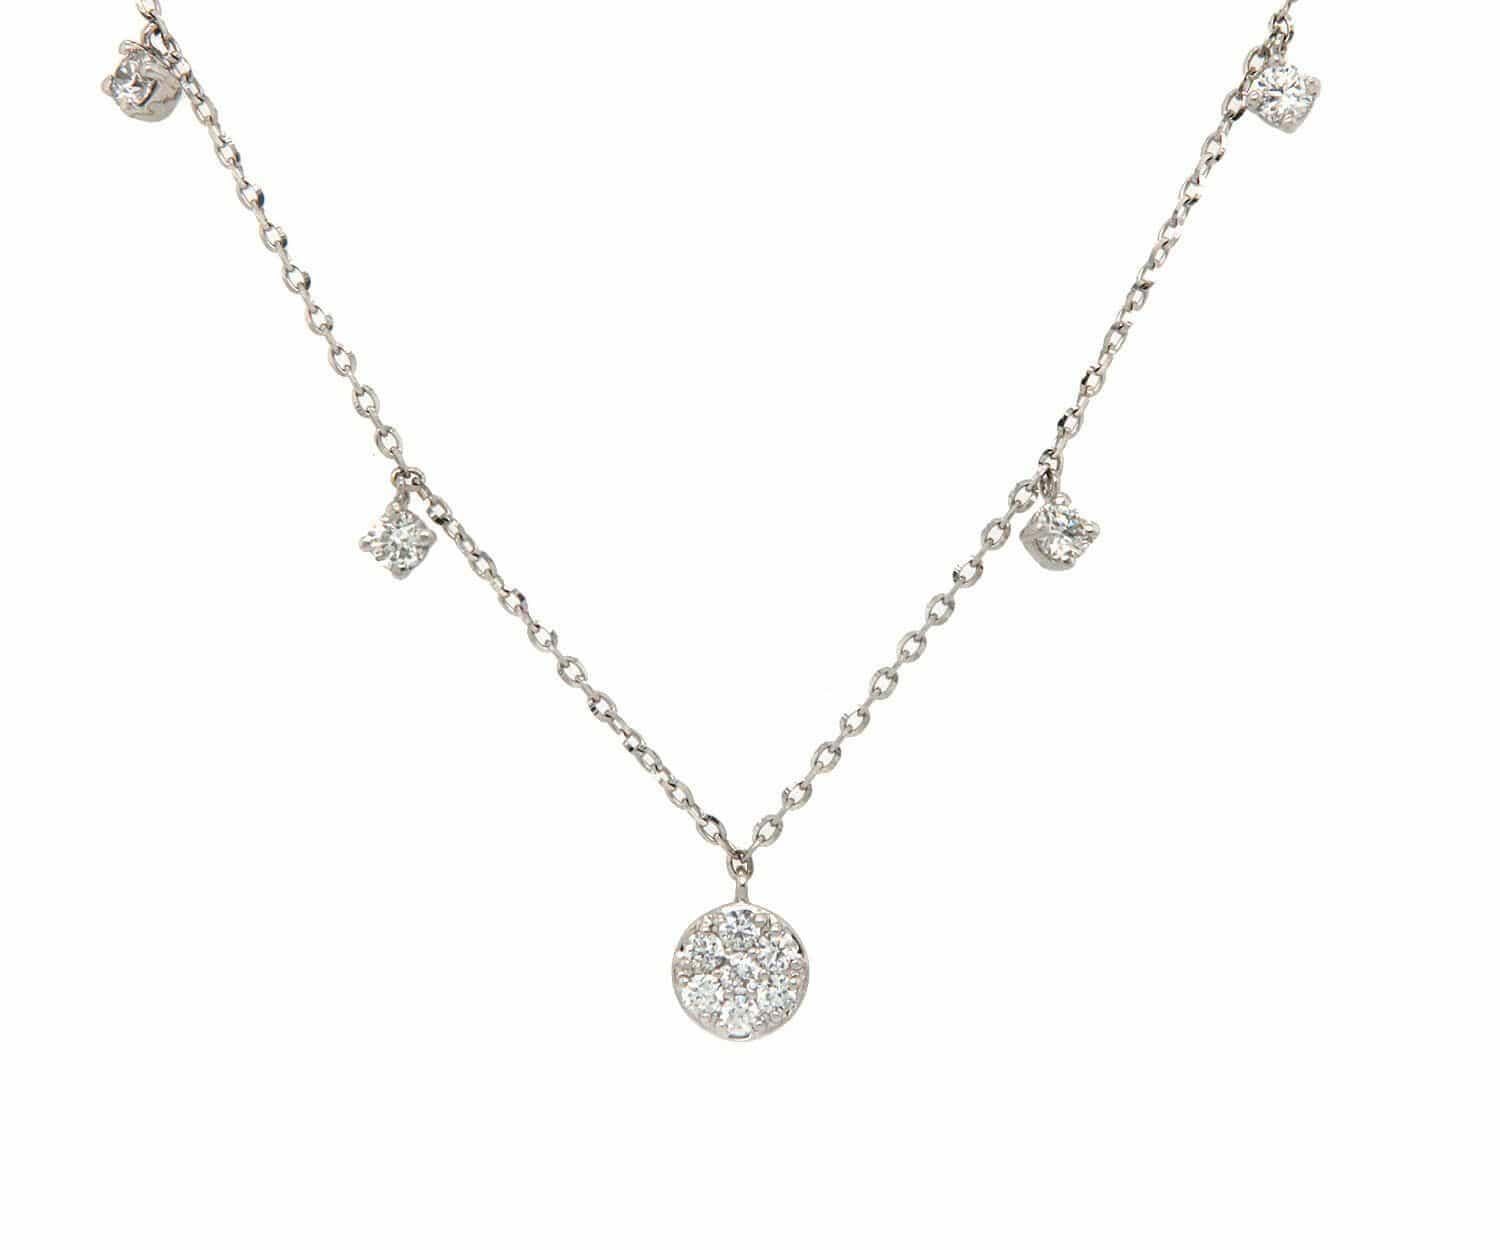 New 0.35ctw Prong and Bezel Set Diamond Station Drop Necklace in 14K

Prong and Bezel Set Diamond Station Drop Necklace
14K White Gold
Diamonds Carat Weight: Approx. 0.35ctw
Necklace Length: Approx. 18.0 Inches (Adjustable to 17.0 and 16.0